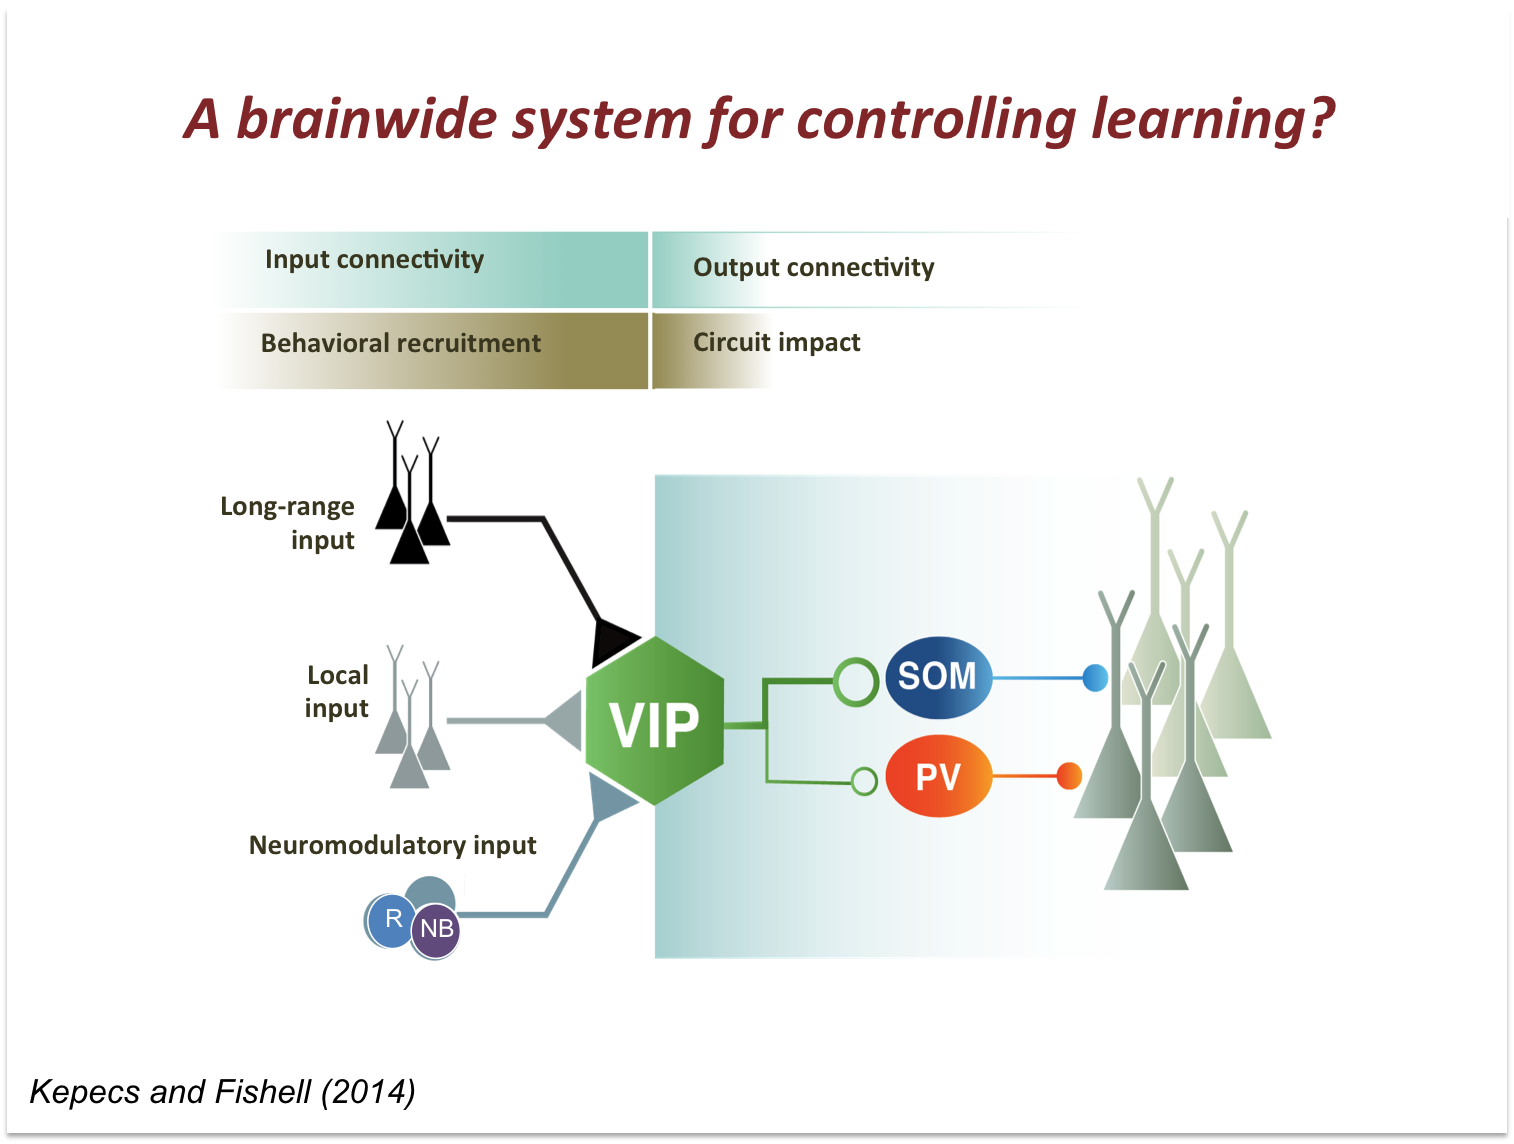 Brainwide system for controlling learning